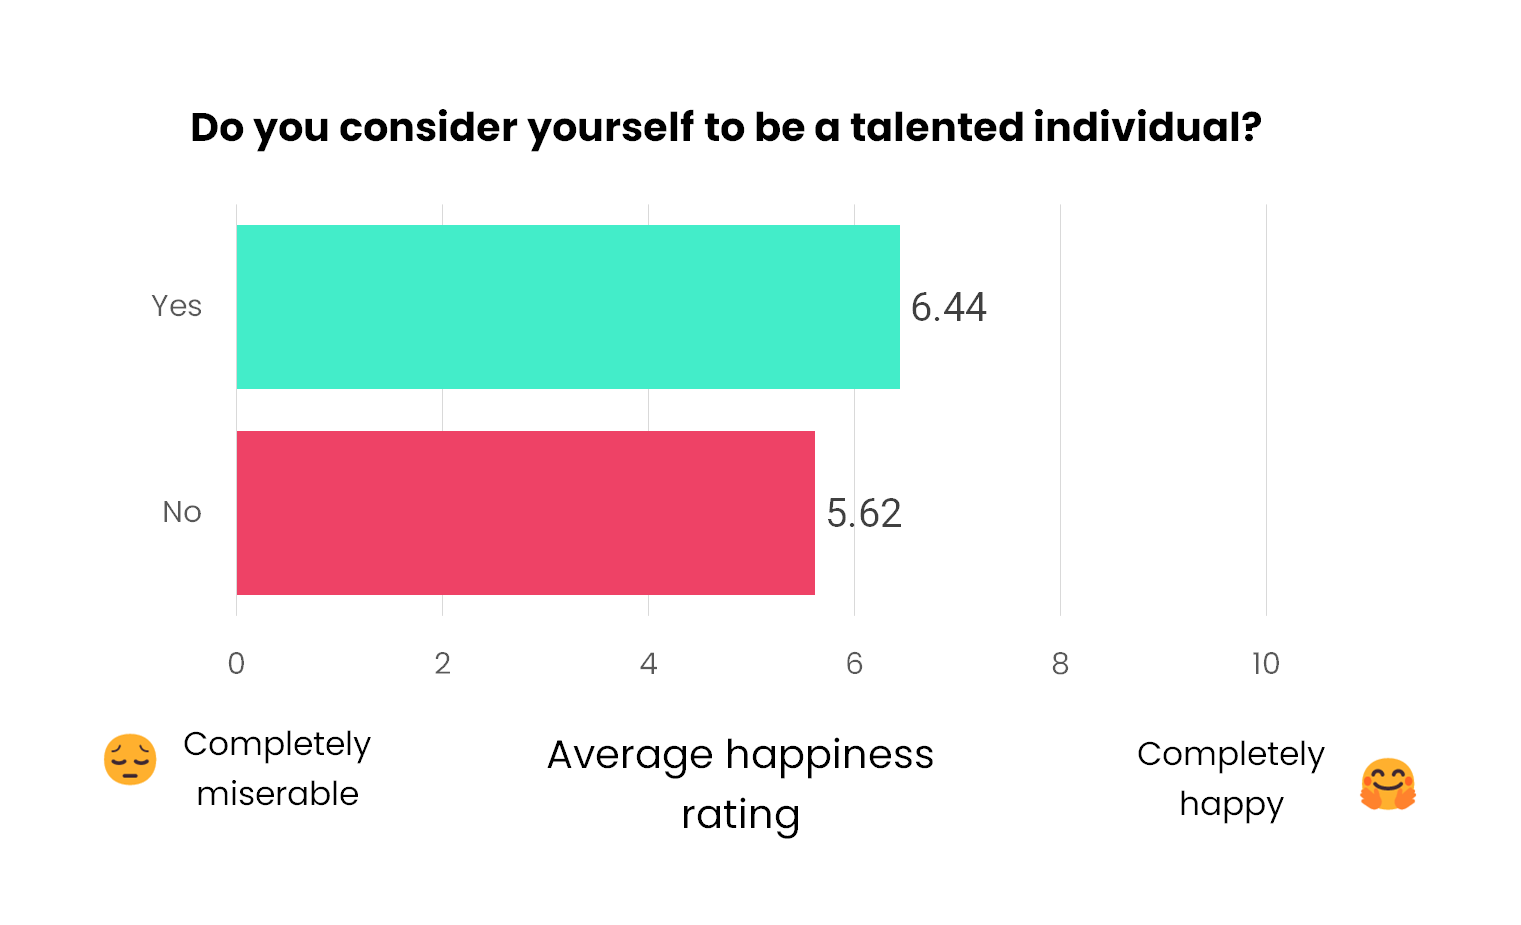 do you consider yourself talented vs happiness ratings bar chart